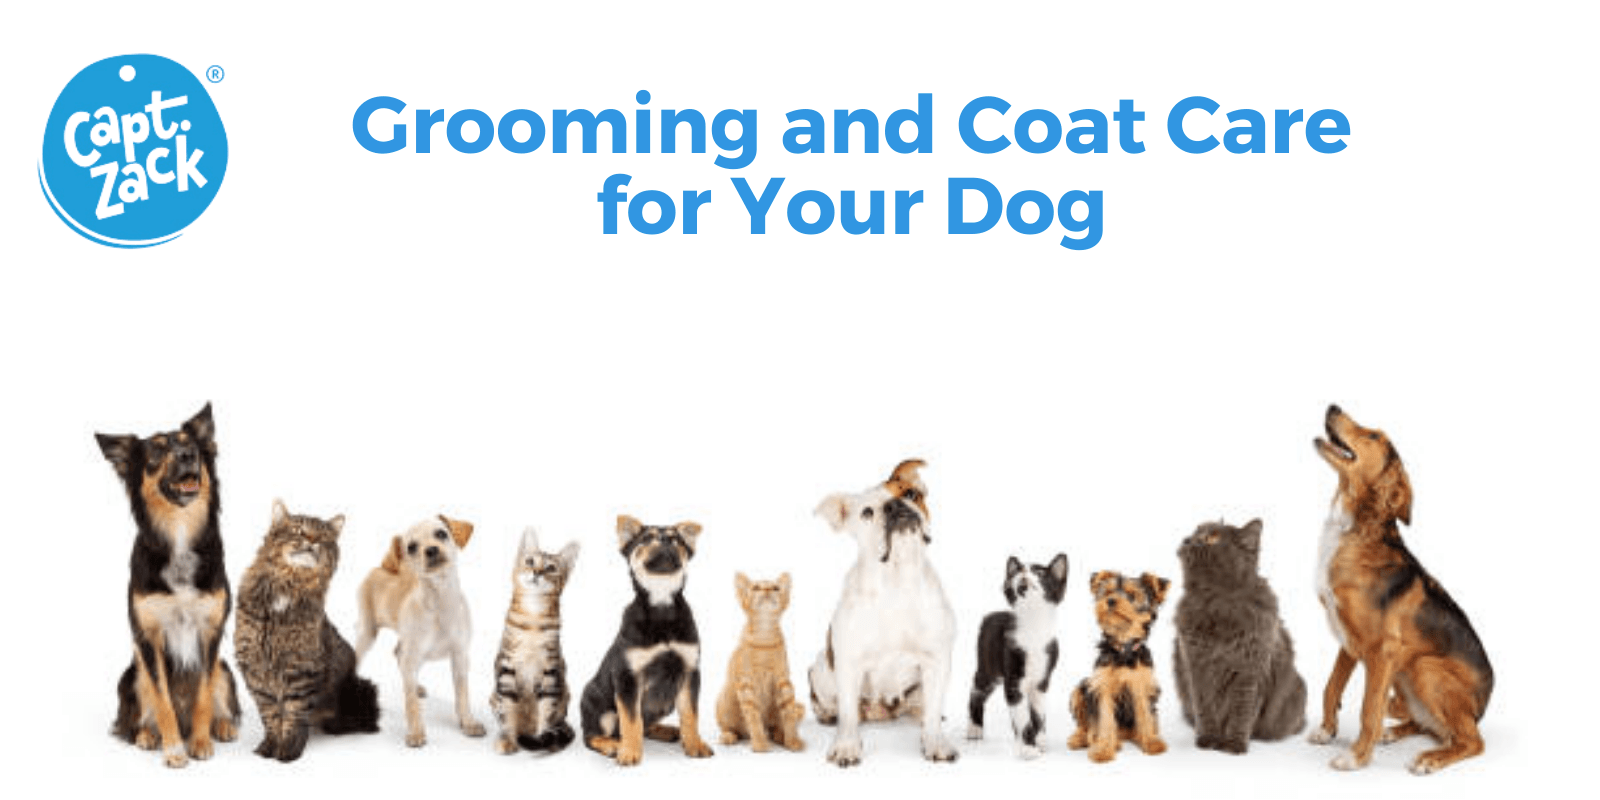 Grooming and Coat Care for Your Dog - Captain Zack